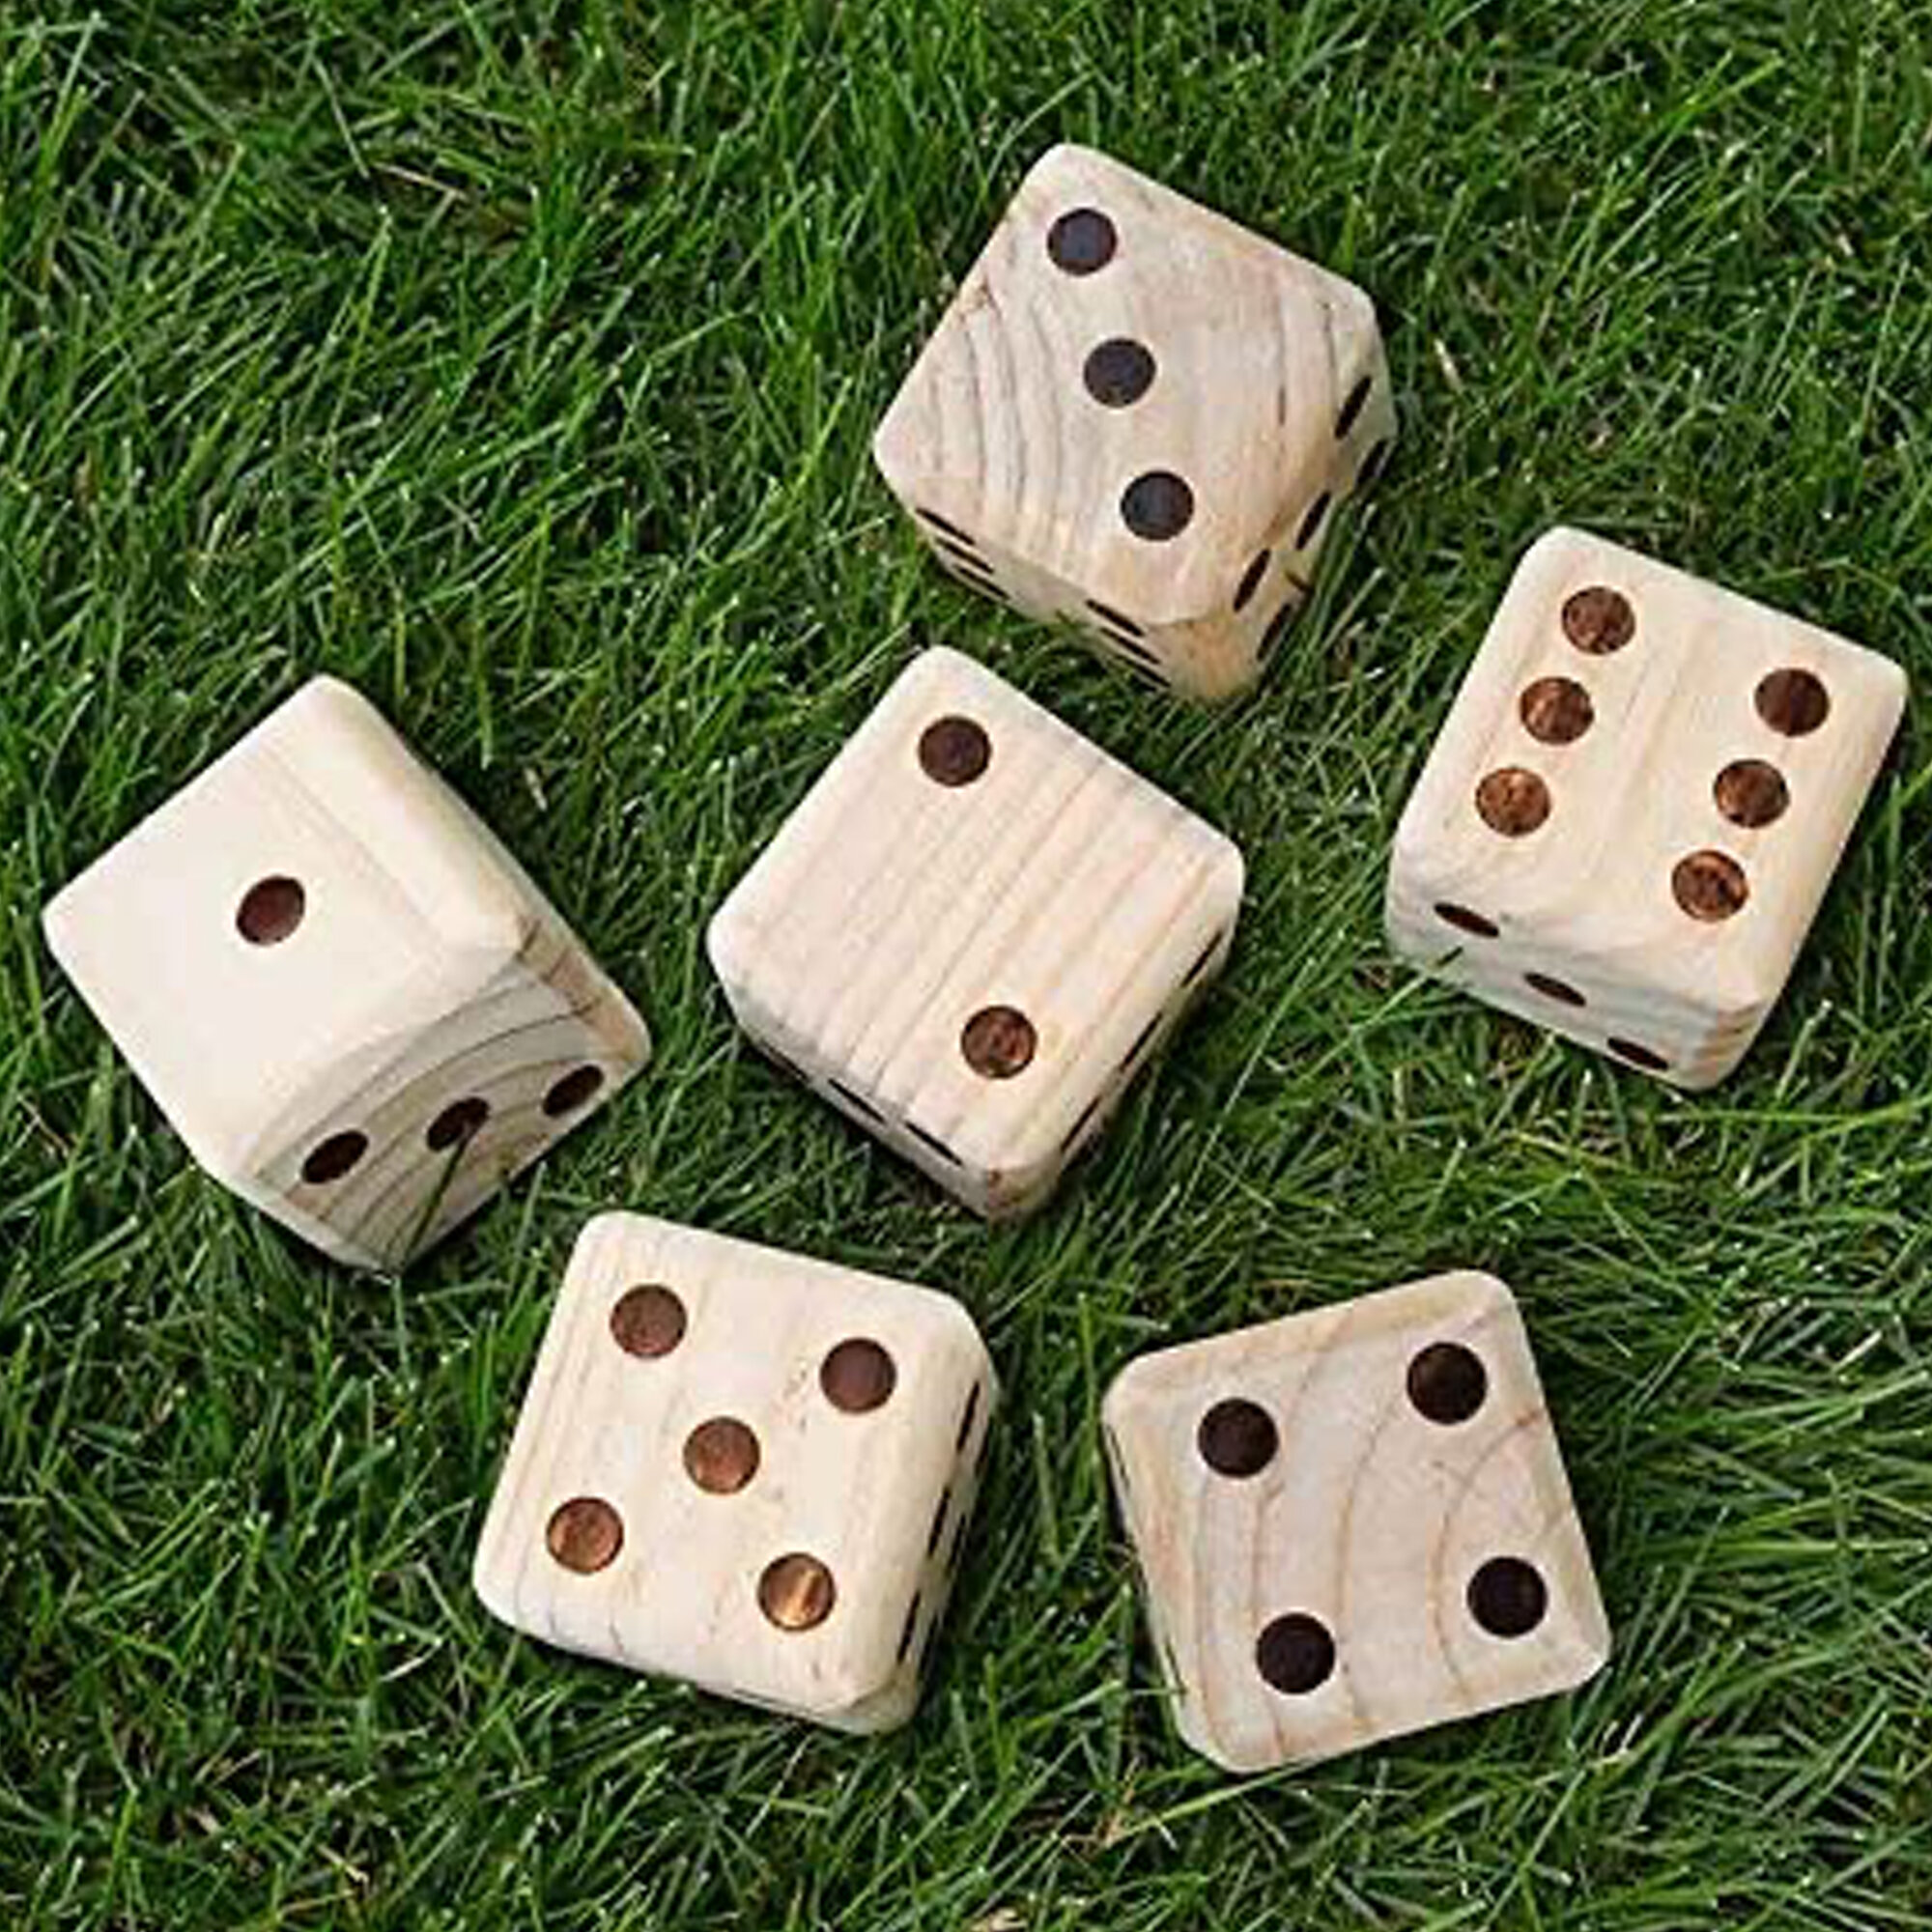 Yard Games For Adults And Family Wooden Yard Games Giant Yard Games Yard Games Sign 